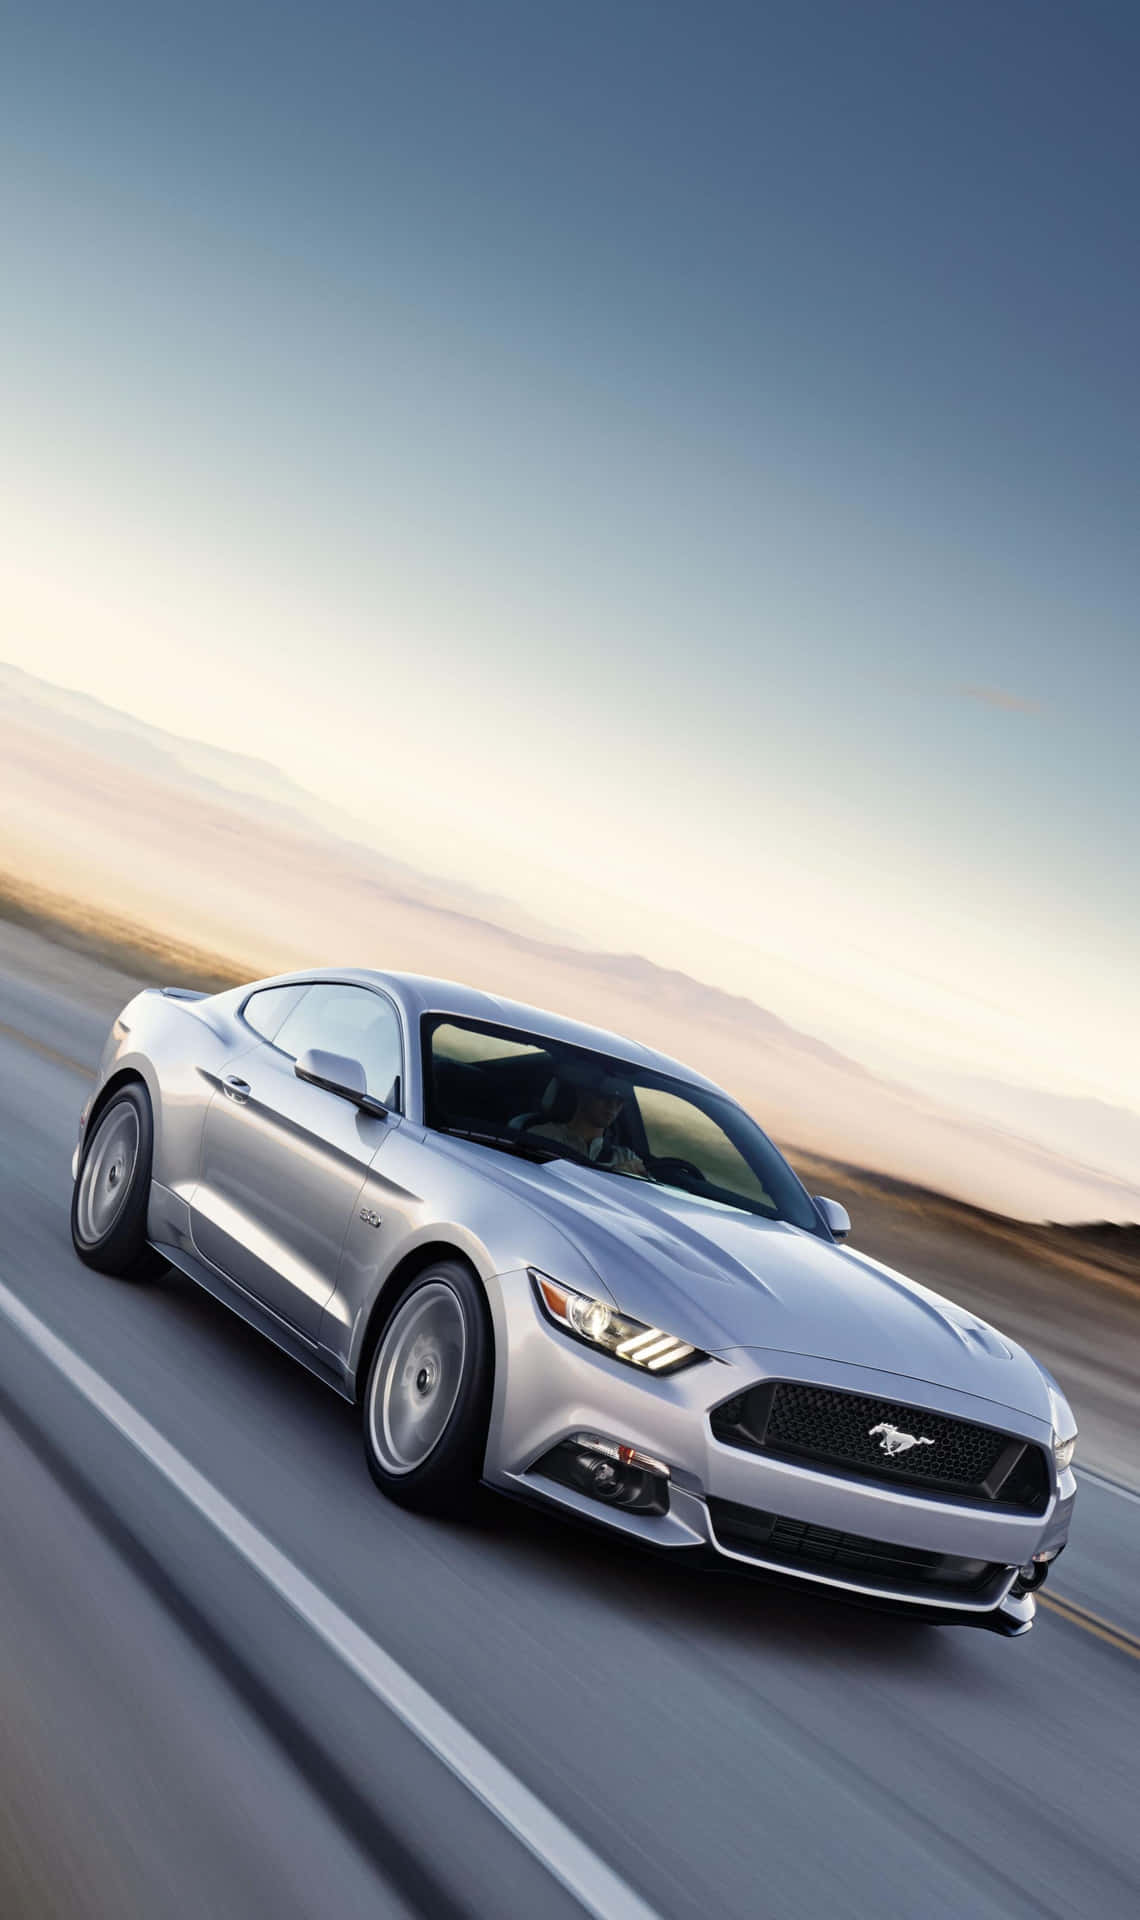 A stunning Ford Mustang California Special against a picturesque backdrop. Wallpaper